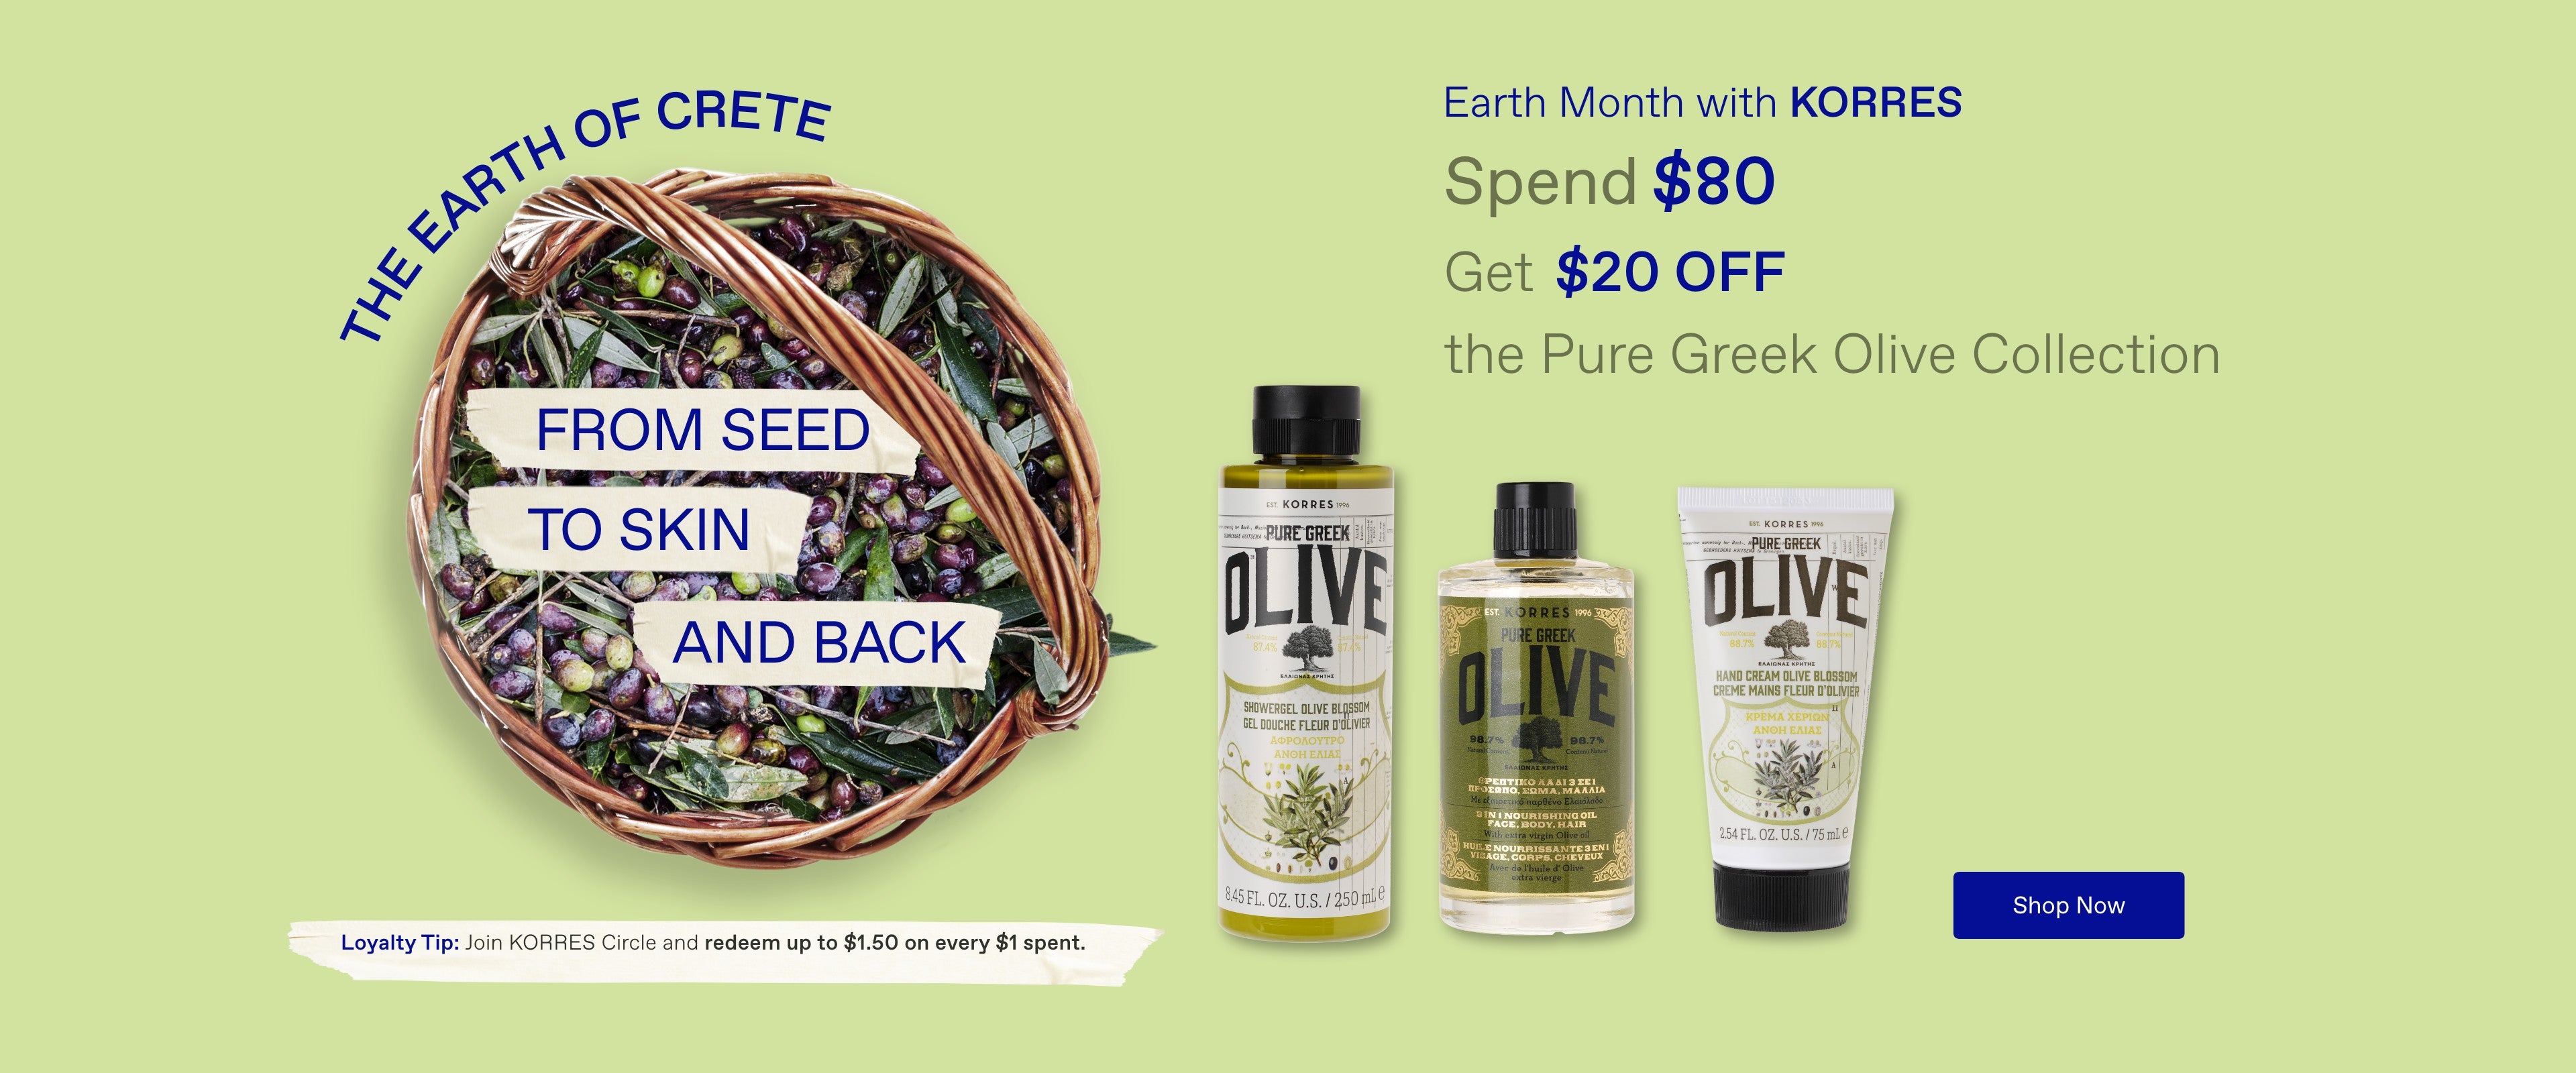 Spend $80, Get $20 on Pure Greek Olive